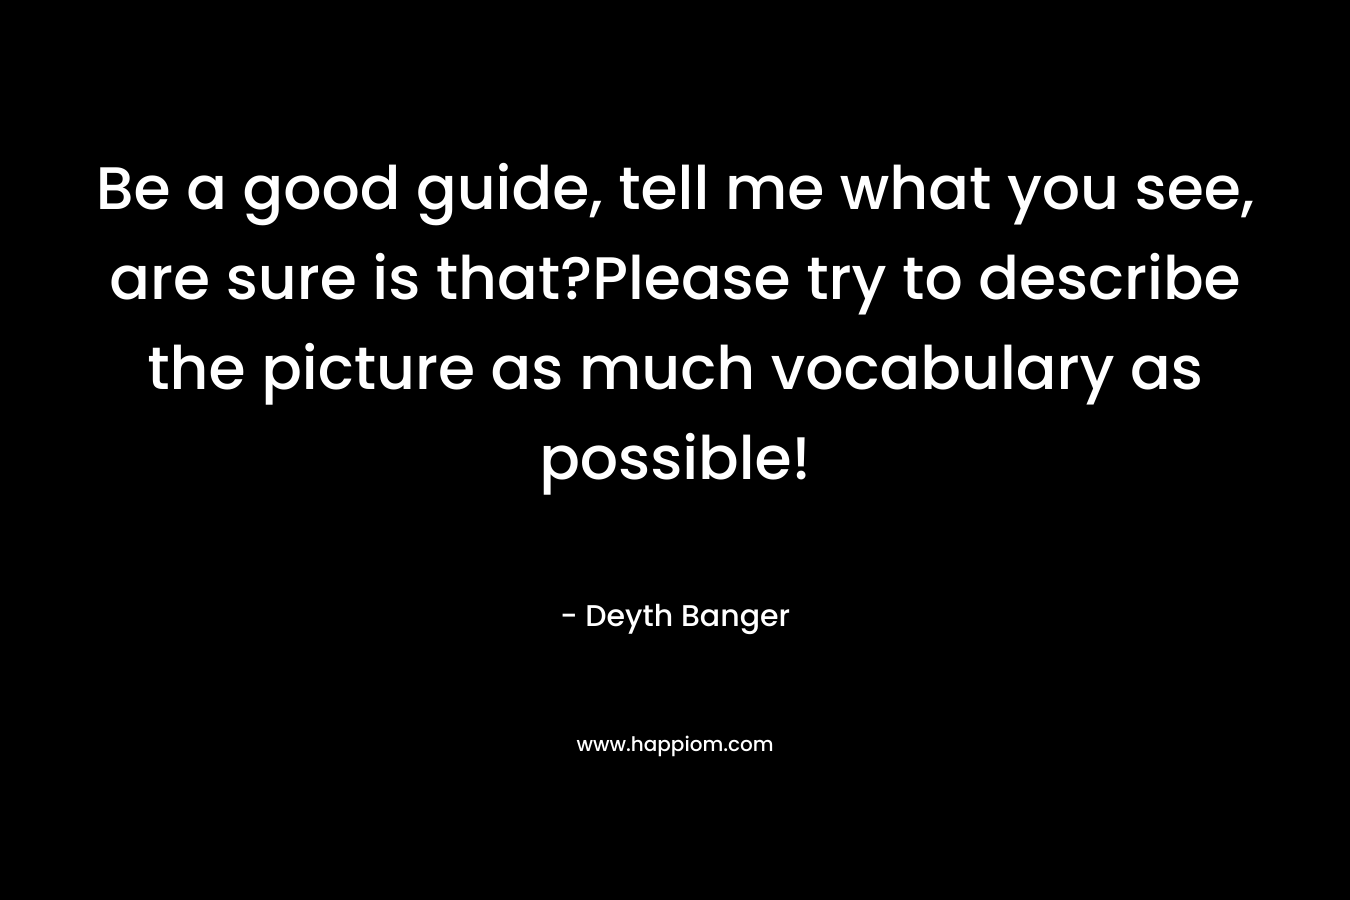 Be a good guide, tell me what you see, are sure is that?Please try to describe the picture as much vocabulary as possible! – Deyth Banger